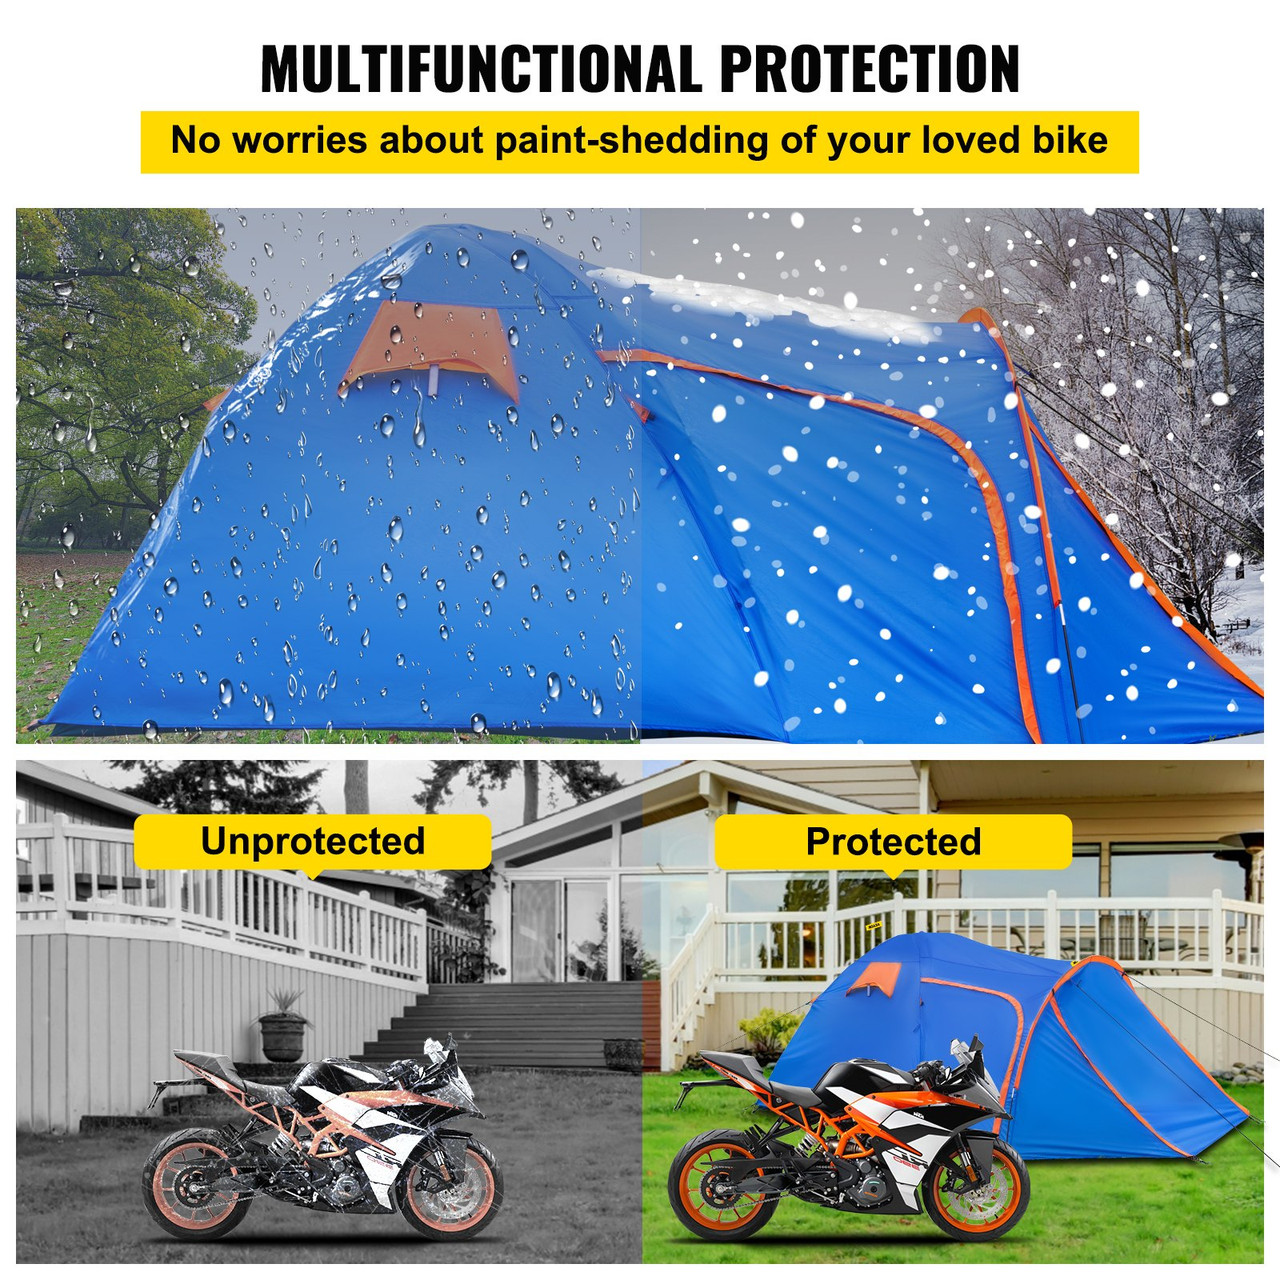 Motorcycle Camping Tent, 2-3 Person Motorcycle Tent for Camping, Waterproof Motorcycle Tent w/Integrated Motorcycle Port, Easy Setup Motorbike Camping Tent for Outdoor Hiking and Backpacking